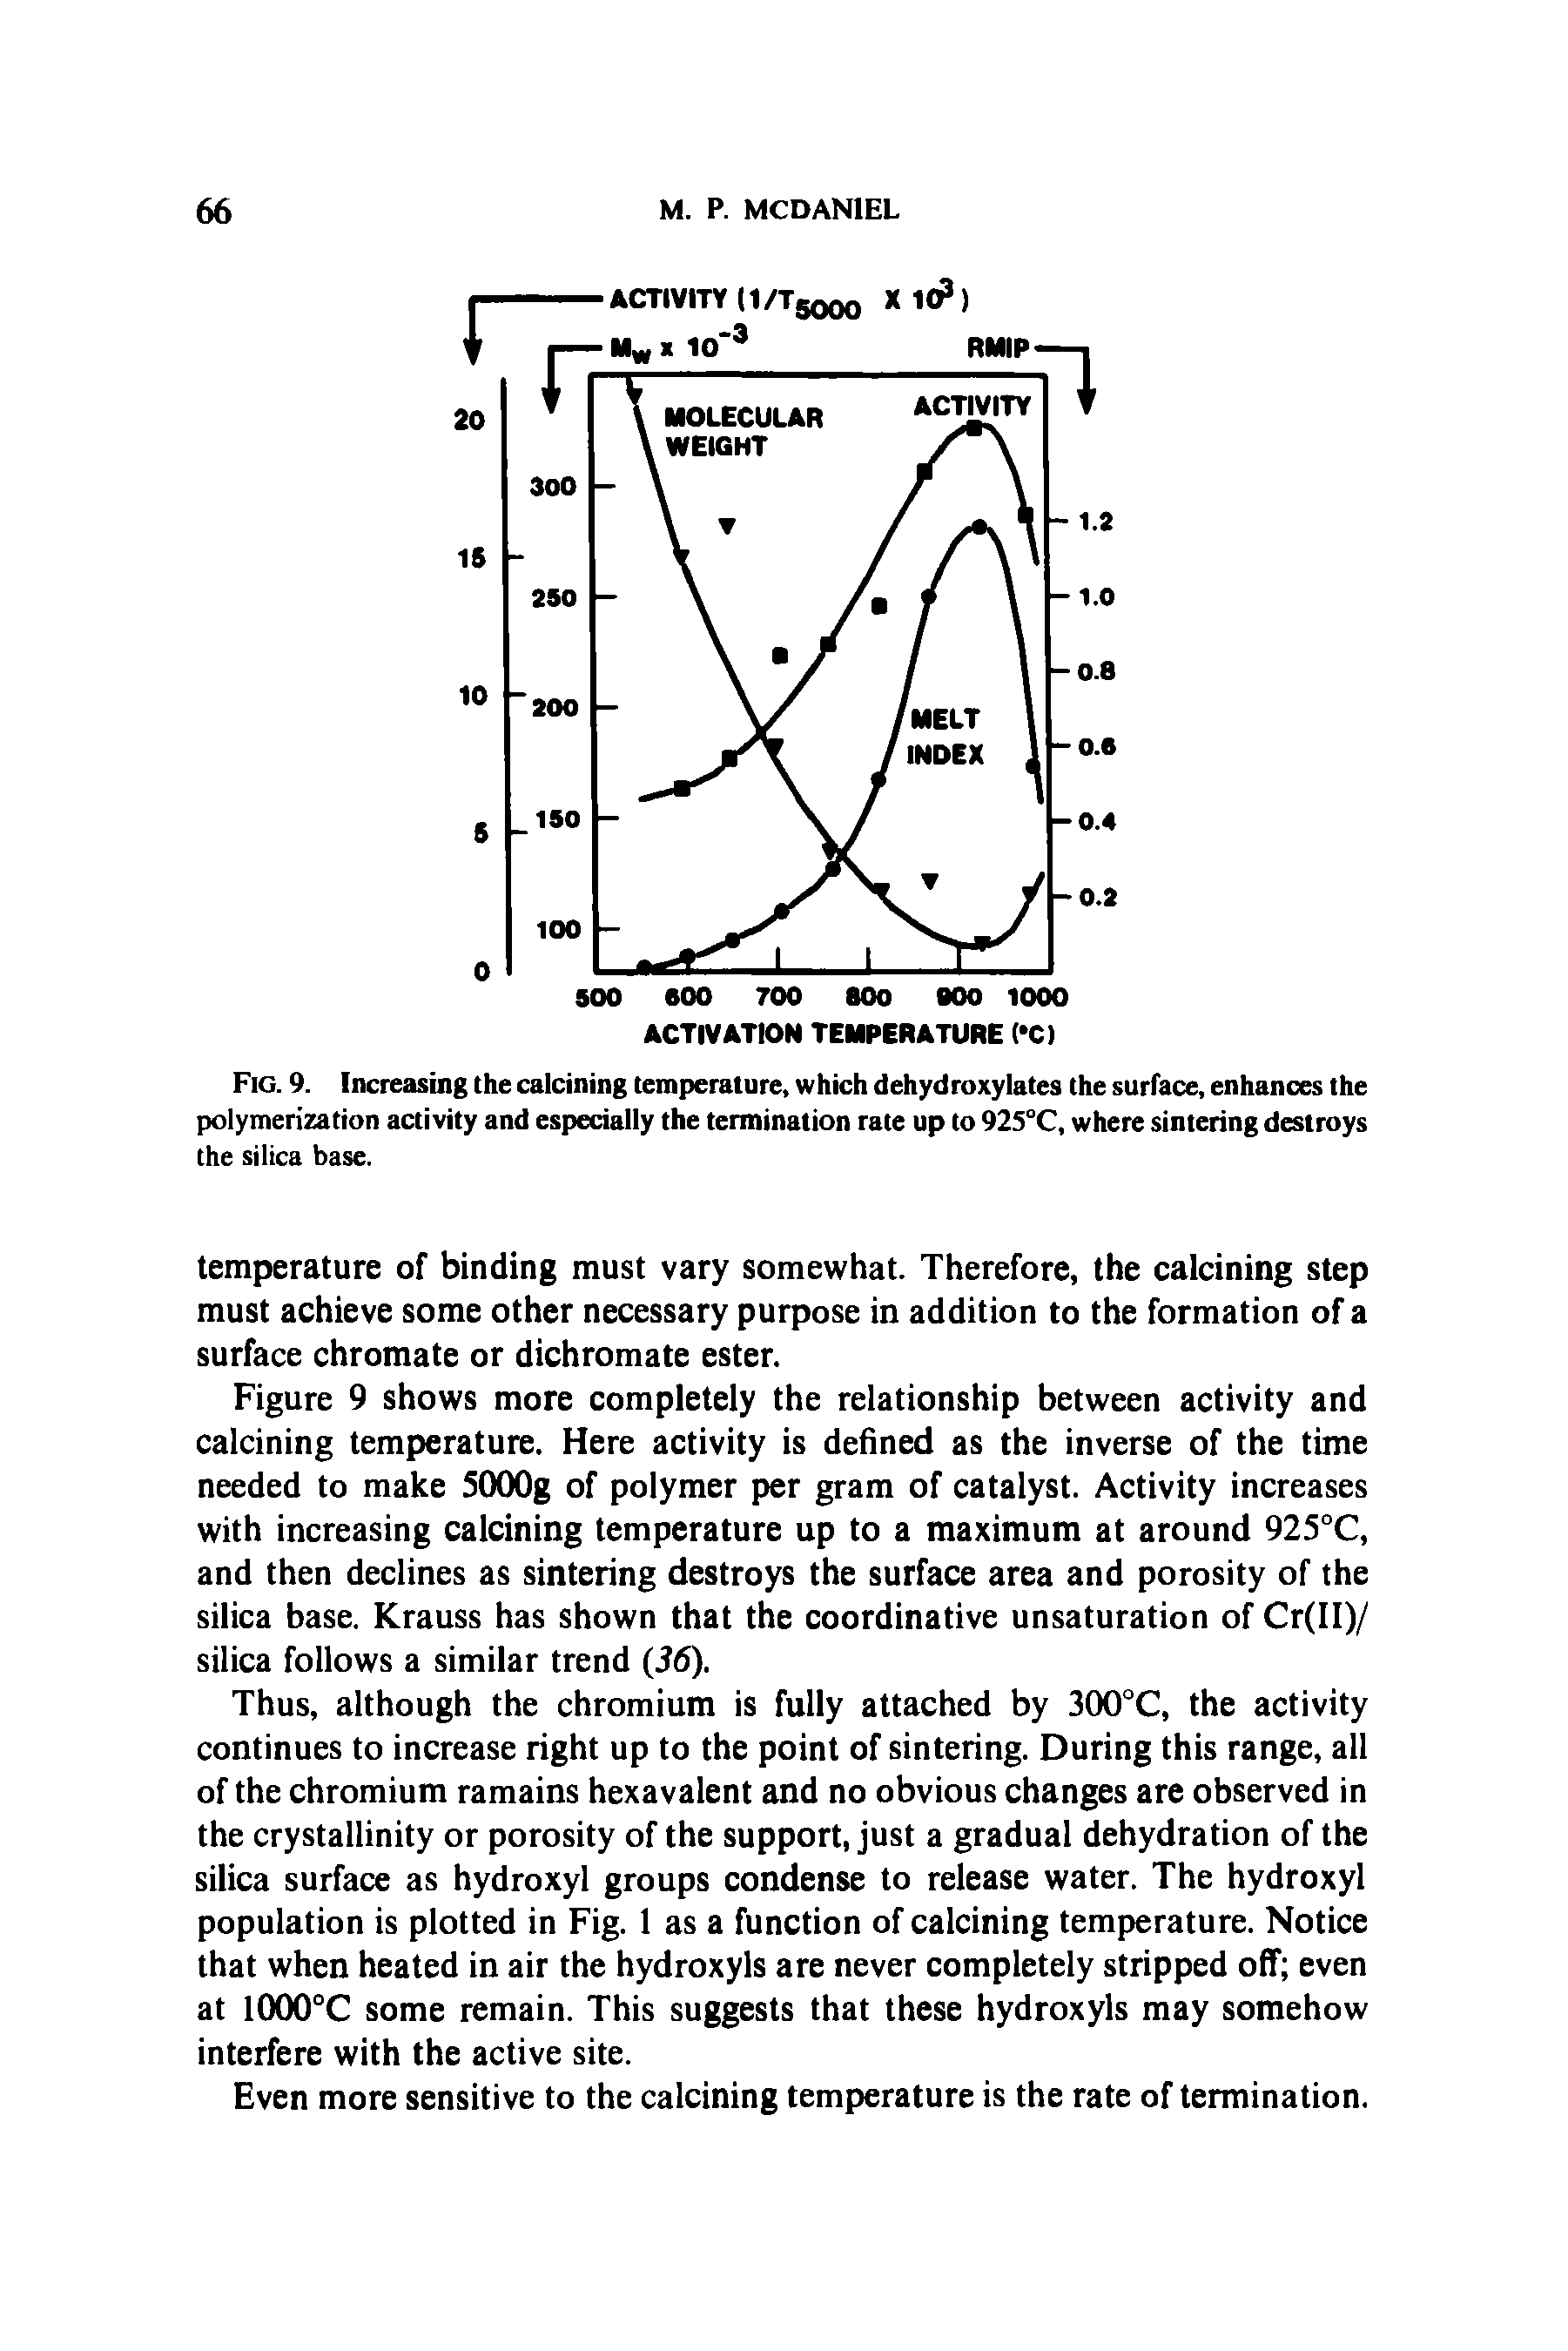 Fig. 9. Increasing the calcining temperature, which dehydroxylates the surface, enhances the polymerization activity and especially the termination rate up to 925°C, where sintering destroys the silica base.